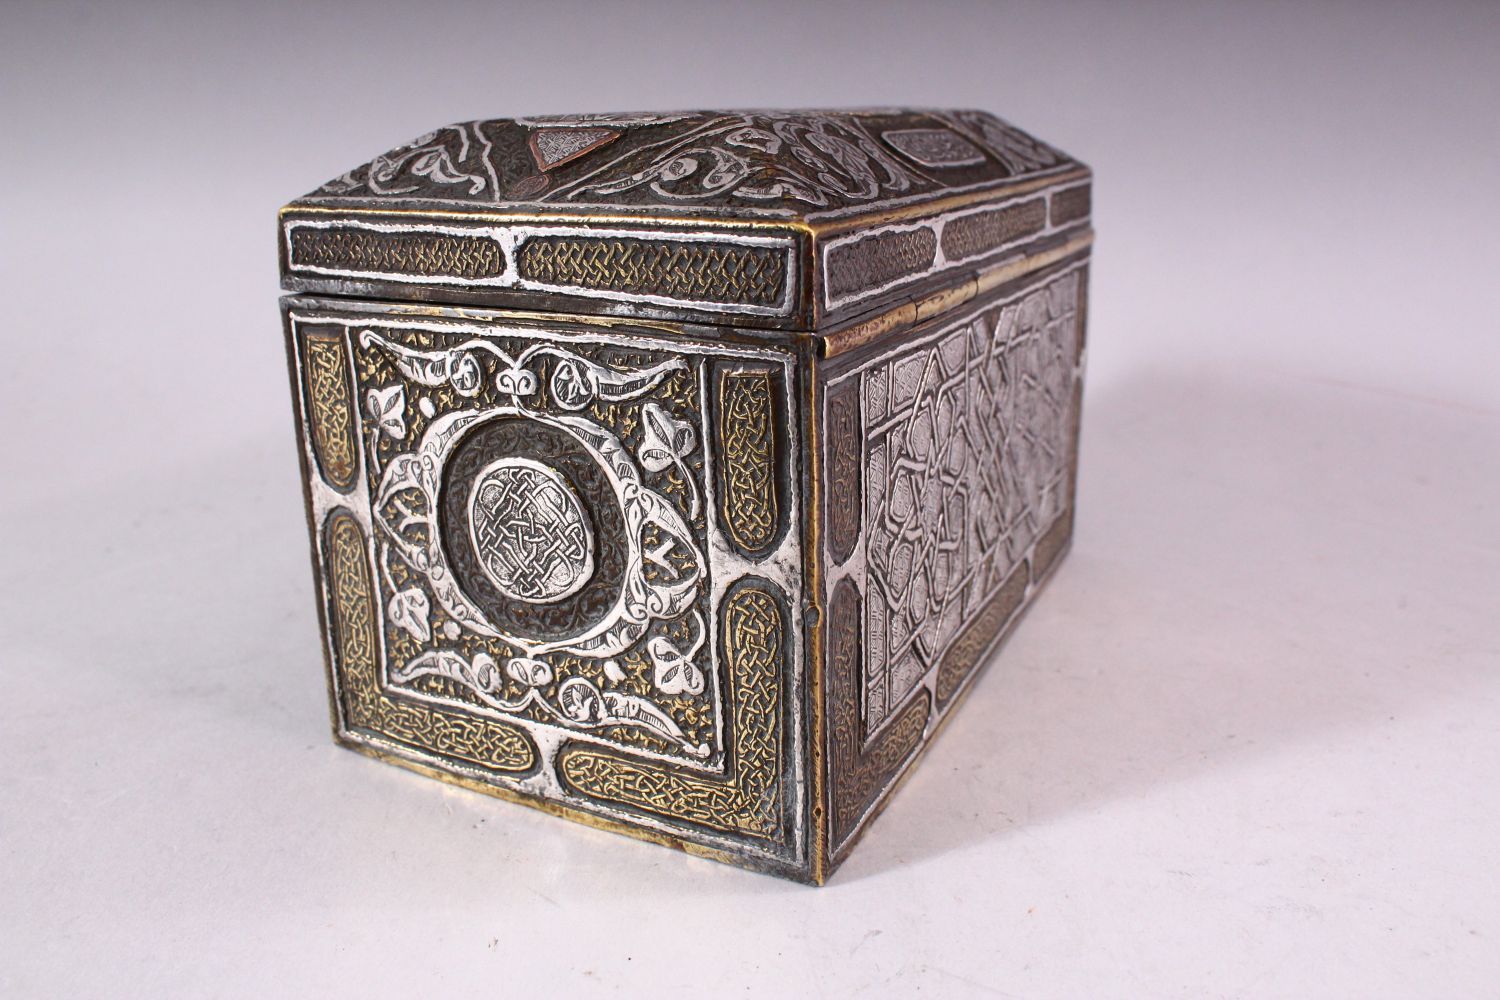 A GOOD 19TH CENTURY SYRIAN SILVER, COPPER AND BRASS RECTANGULAR CASKET, with panels of calligraphy - Image 8 of 10